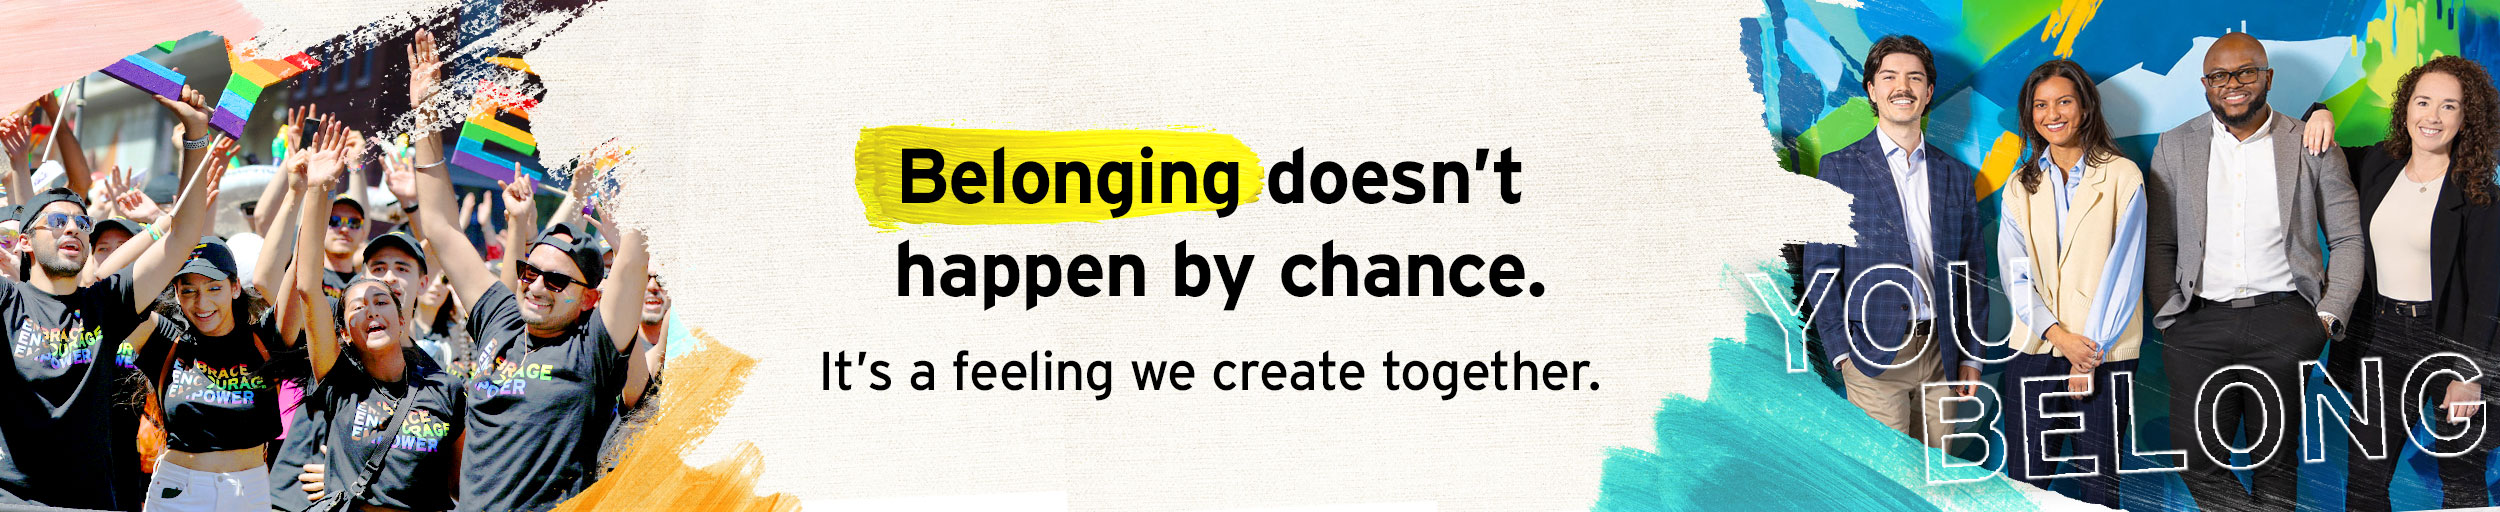 Belonging doesn't happen by chance.  It's a feeling we create together.  Click to see how